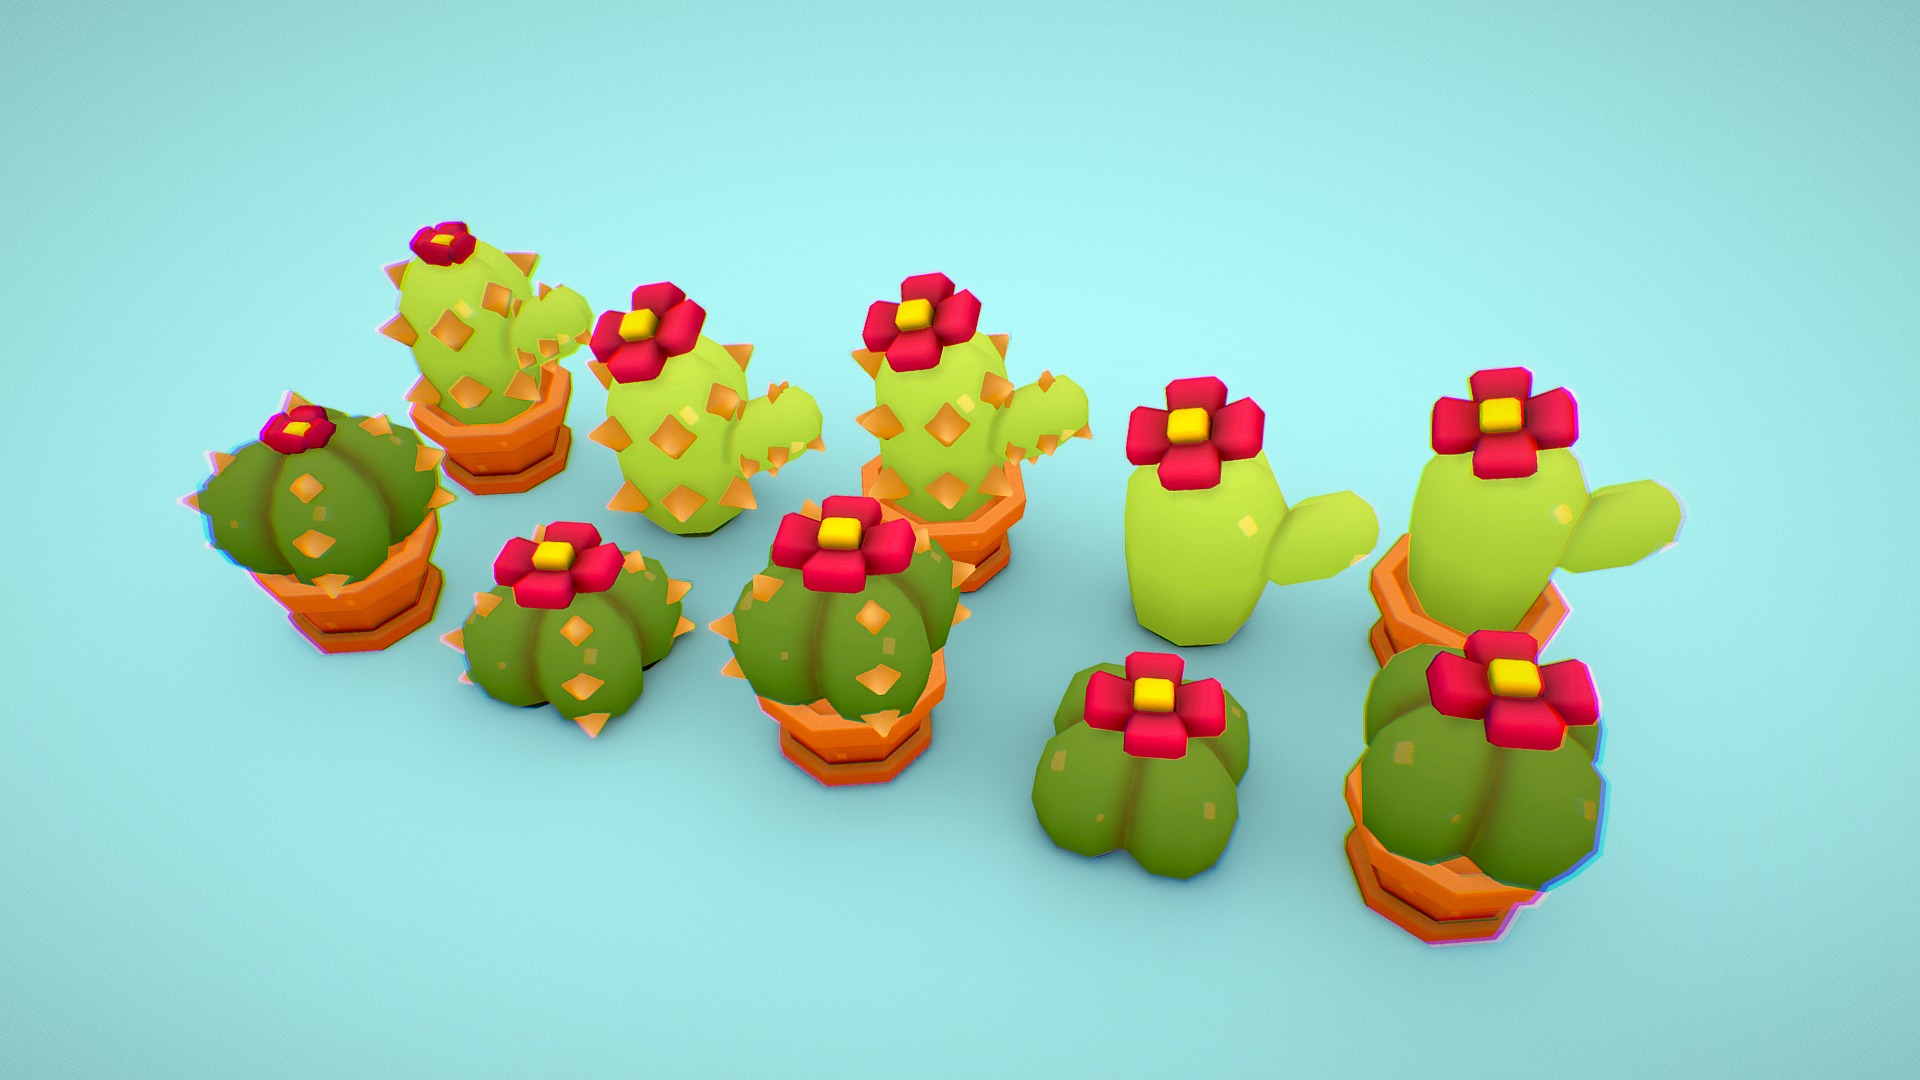 3D model Cute Cactus Lowpoly Set !! - This is a 3D model of the Cute Cactus Lowpoly Set !!. The 3D model is about a group of colorful objects.